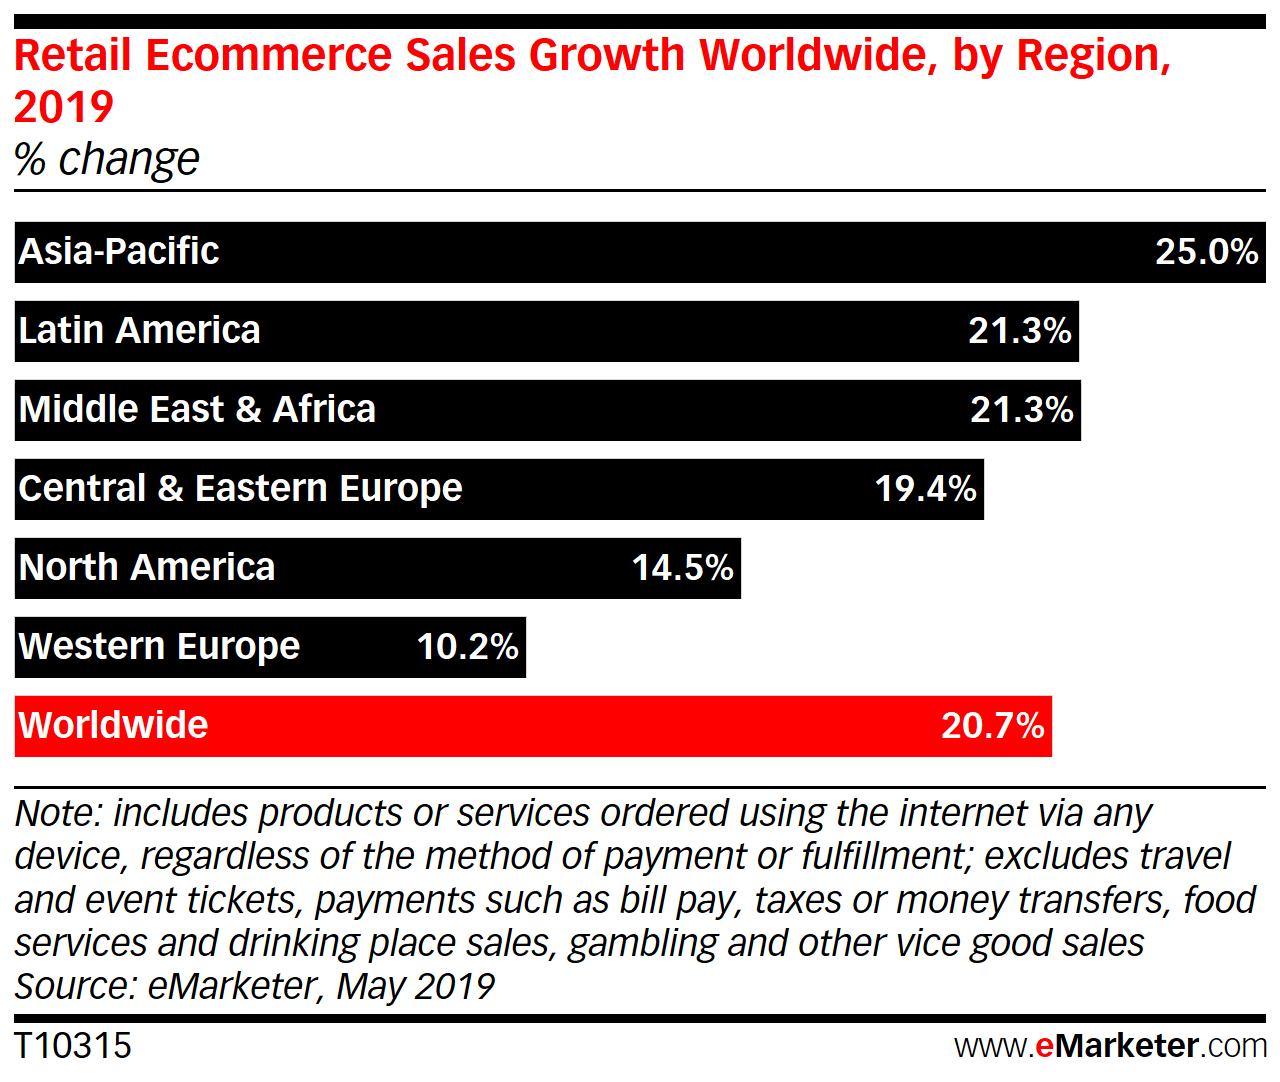 Retail ecommerce sales growth worldwide by region